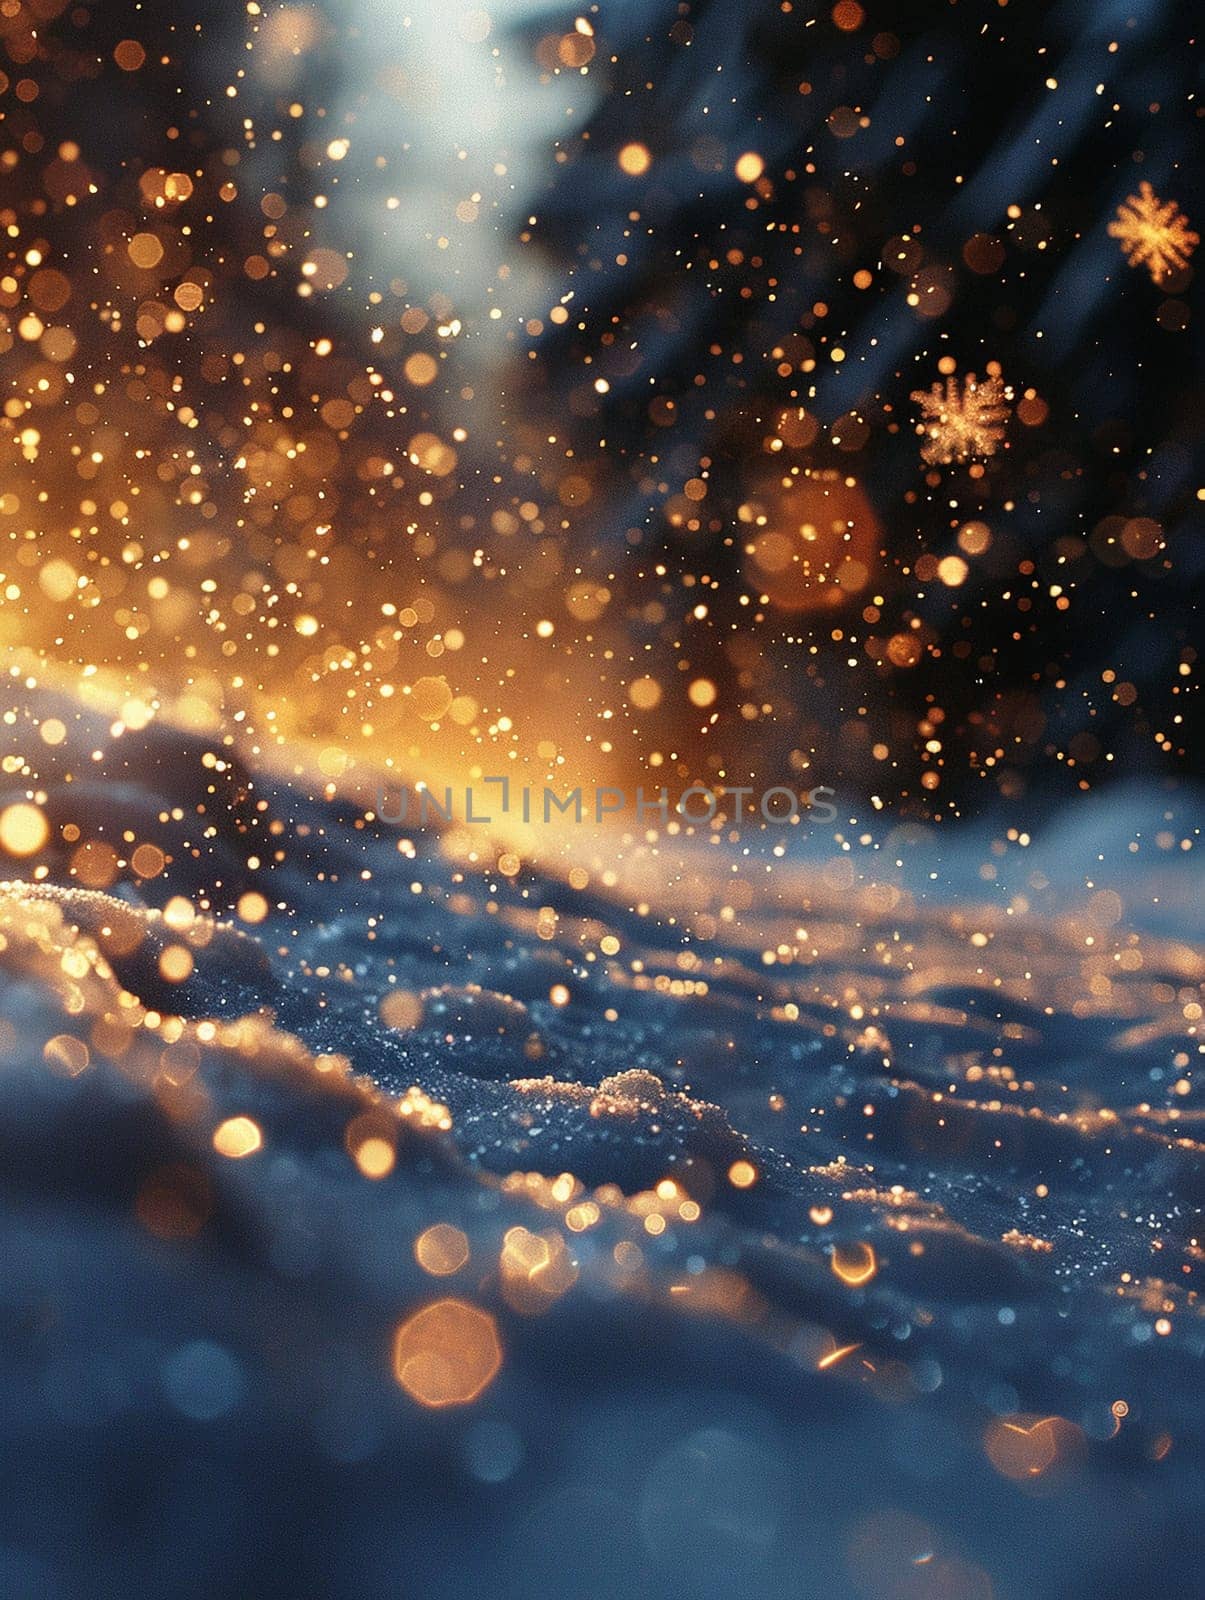 Snowflakes gently falling against the backdrop of a night sky by Benzoix